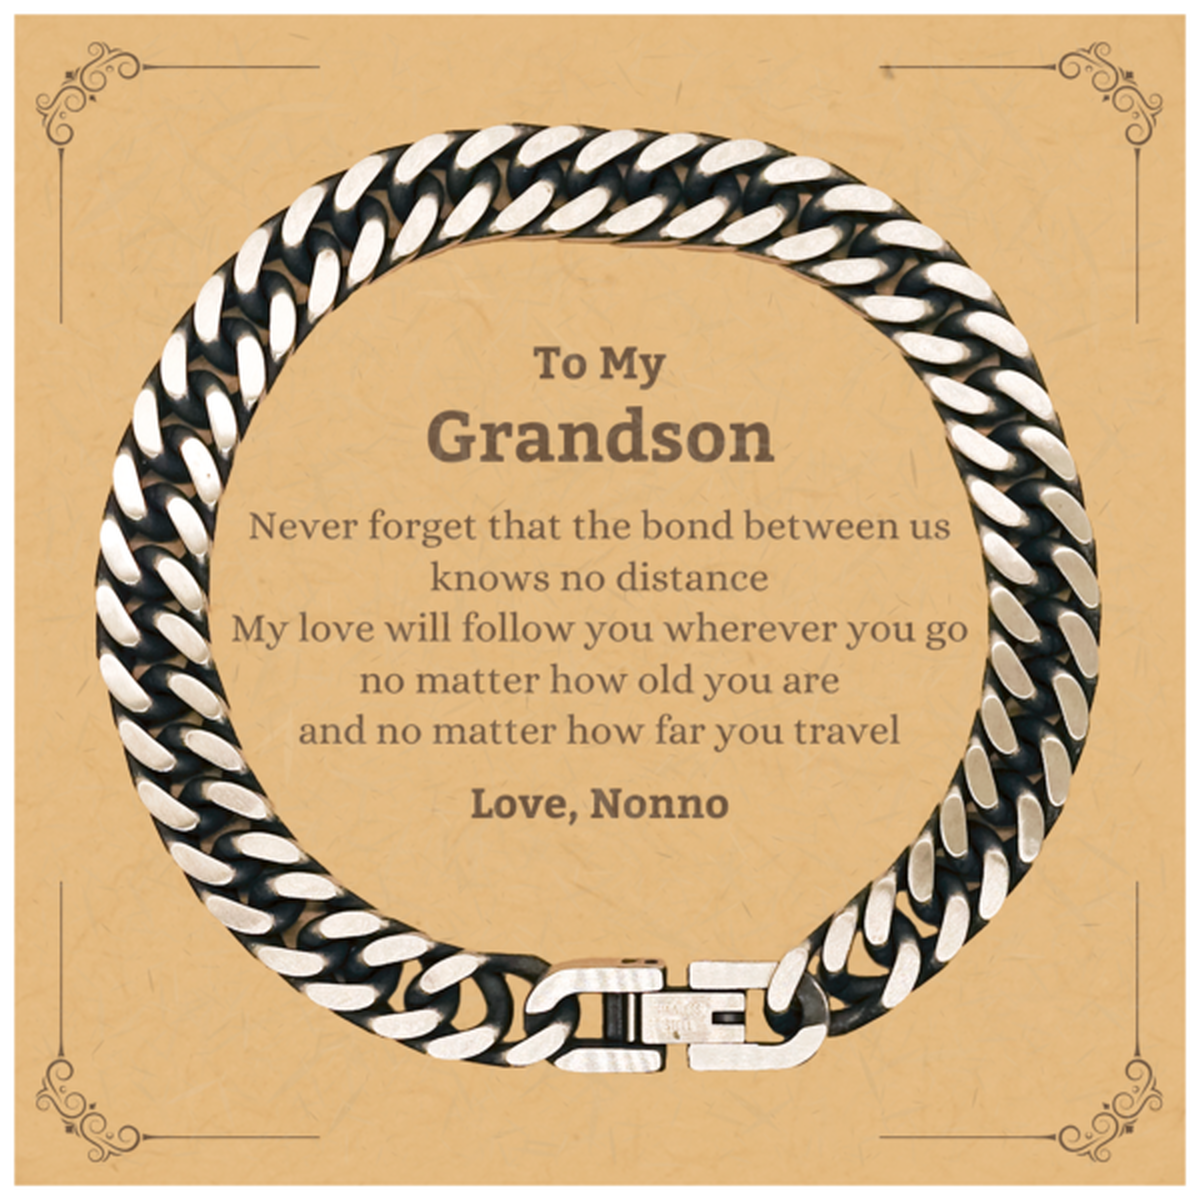 Grandson Birthday Gifts from Nonno, Adjustable Cuban Link Chain Bracelet for Grandson Christmas Graduation Unique Gifts Grandson Never forget that the bond between us knows no distance. Love, Nonno